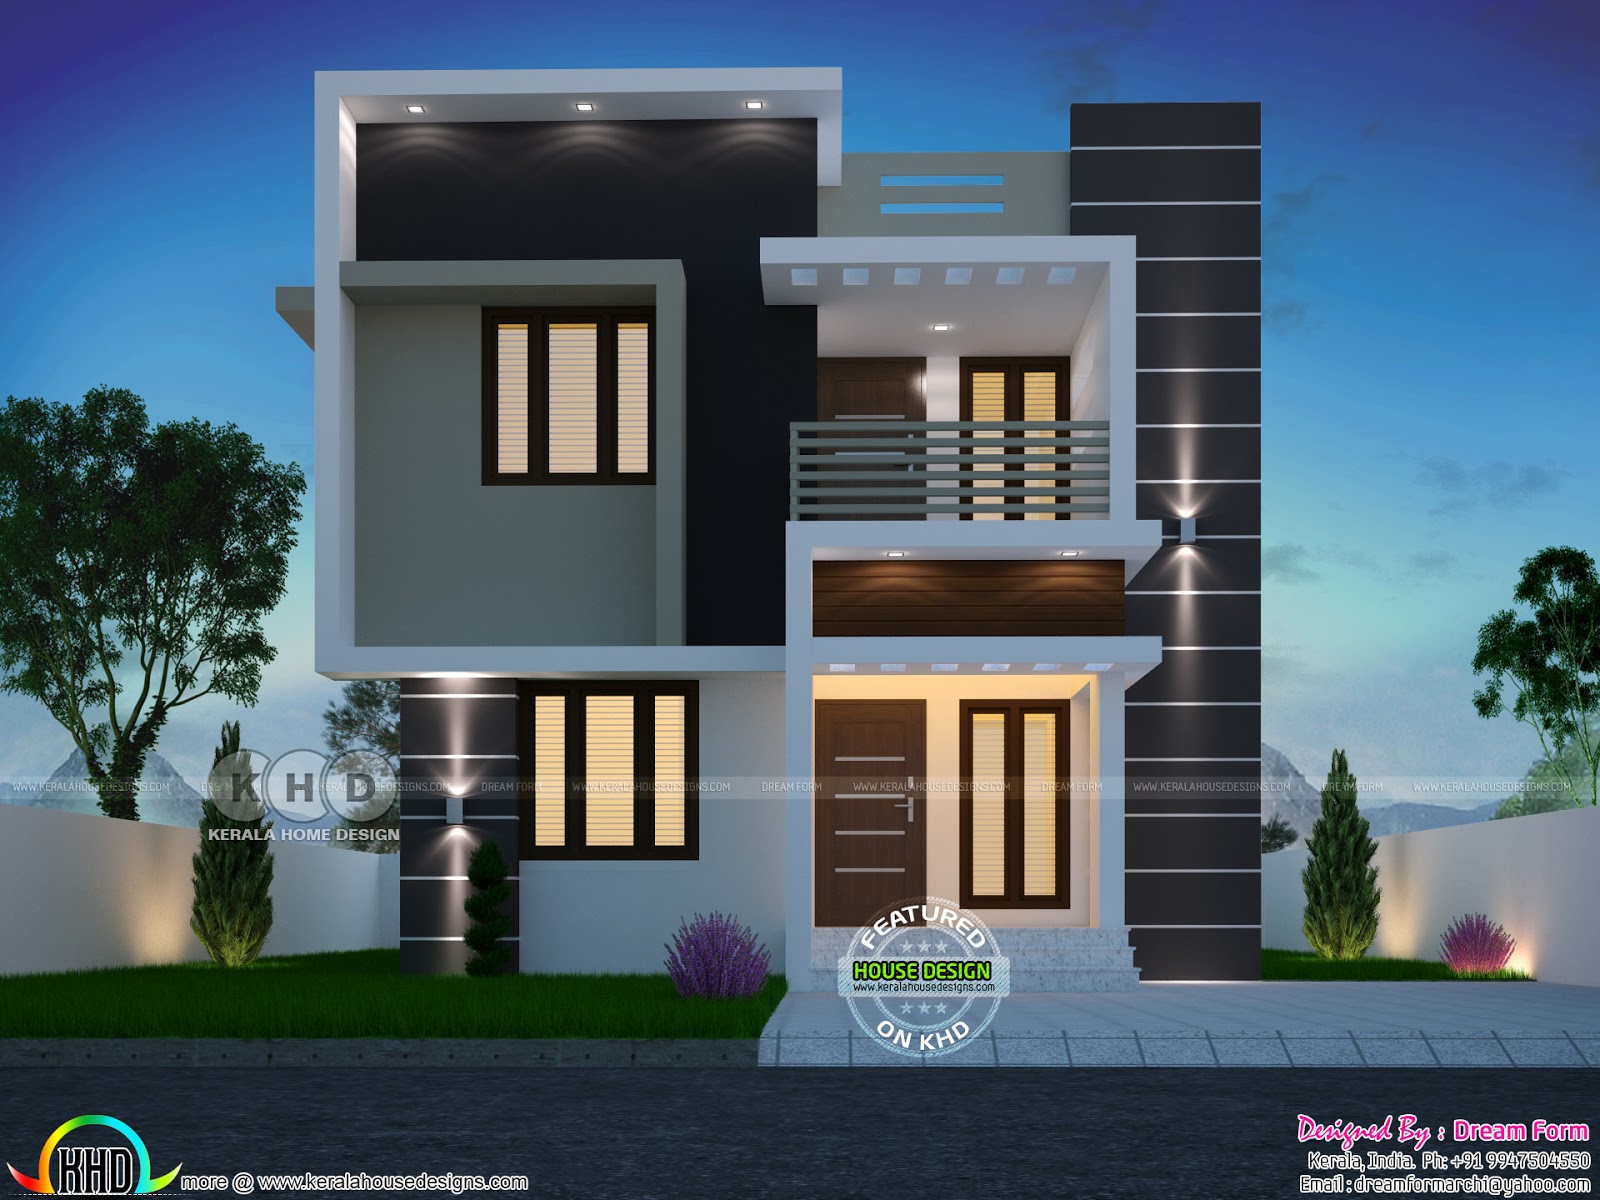 Small box model house with 3 bedrooms Kerala home design 